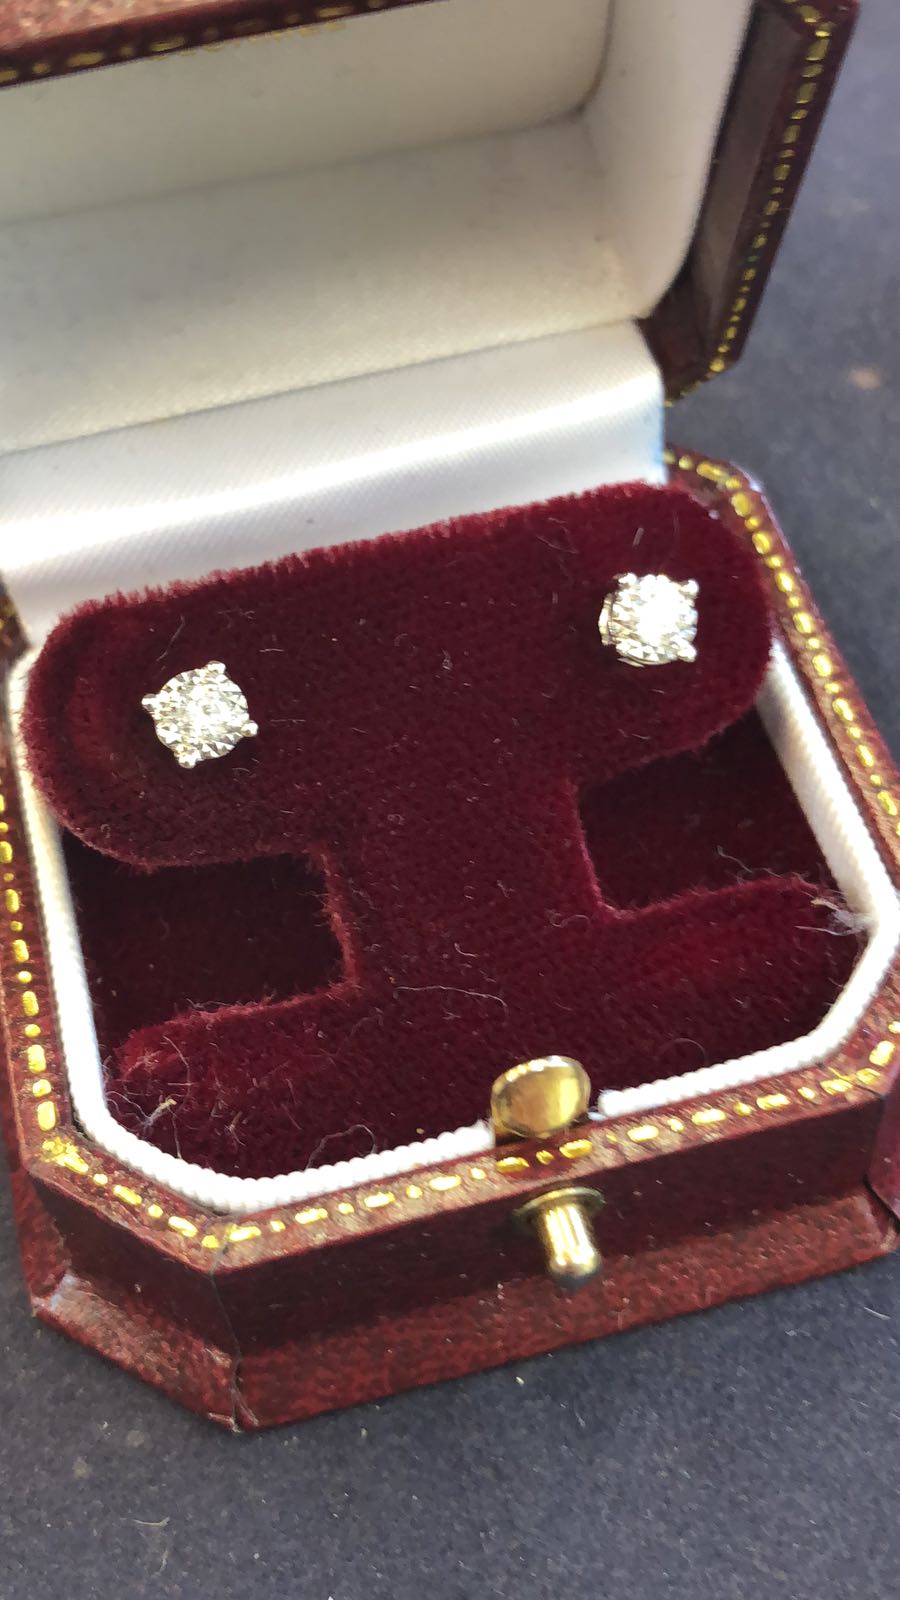 Pair of 18 Carat White Gold Mounted Diamond Solitaire Earrings Approximately 0.6 Carat Total Weight